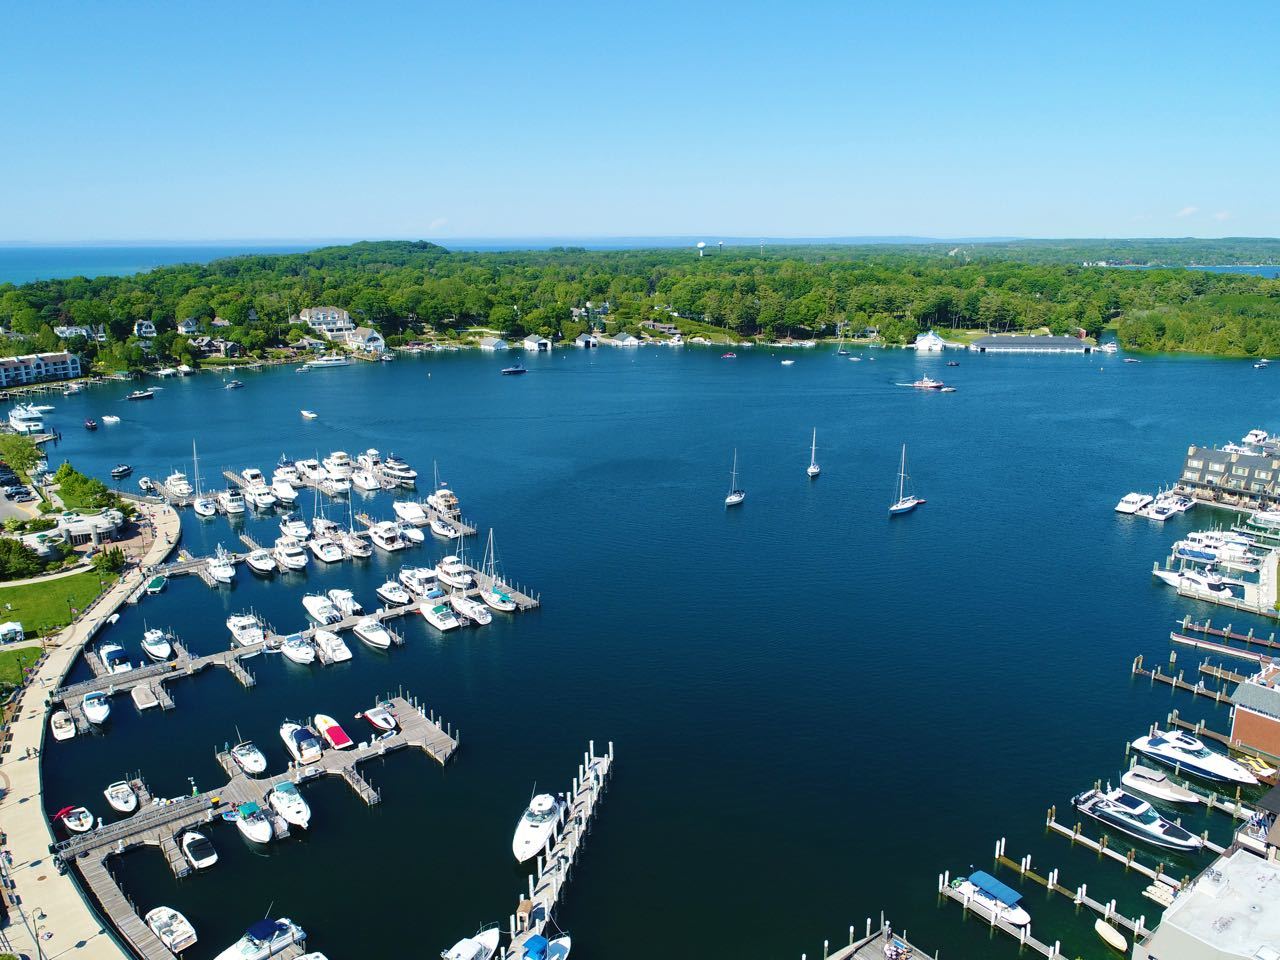 Charlevoix Real Estate: Lake Charlevoix Condominium Investment Opportunities